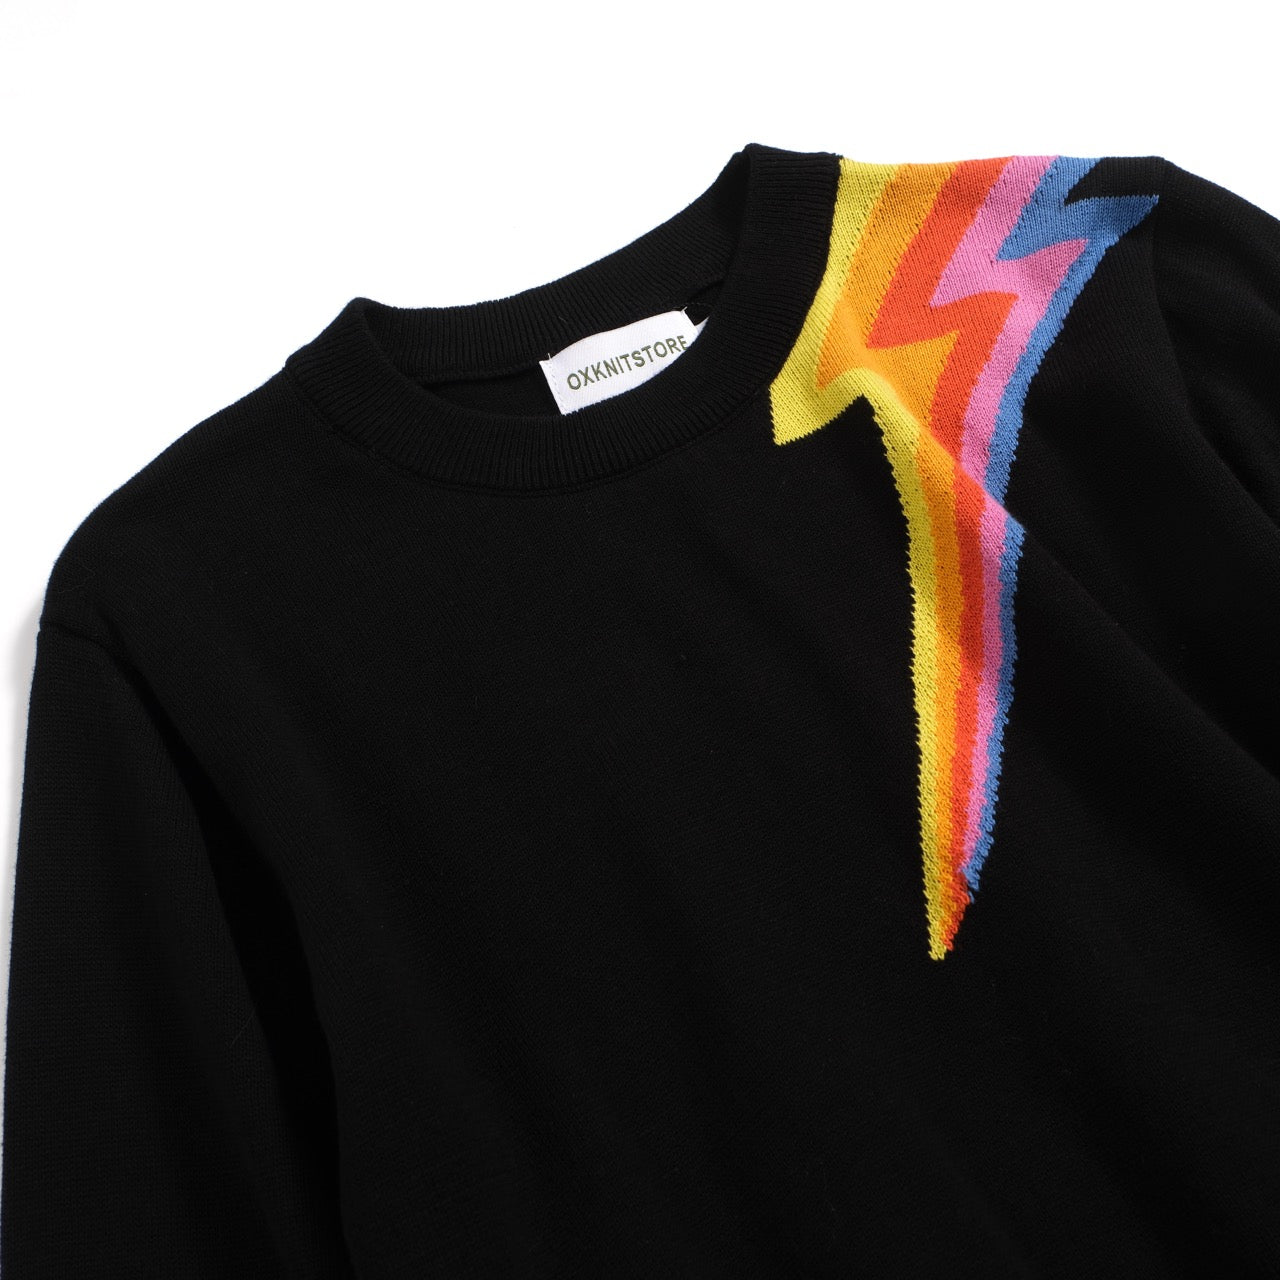 Women's Black Knitted T-Shirt With Rainbow Lightning & Sleeve